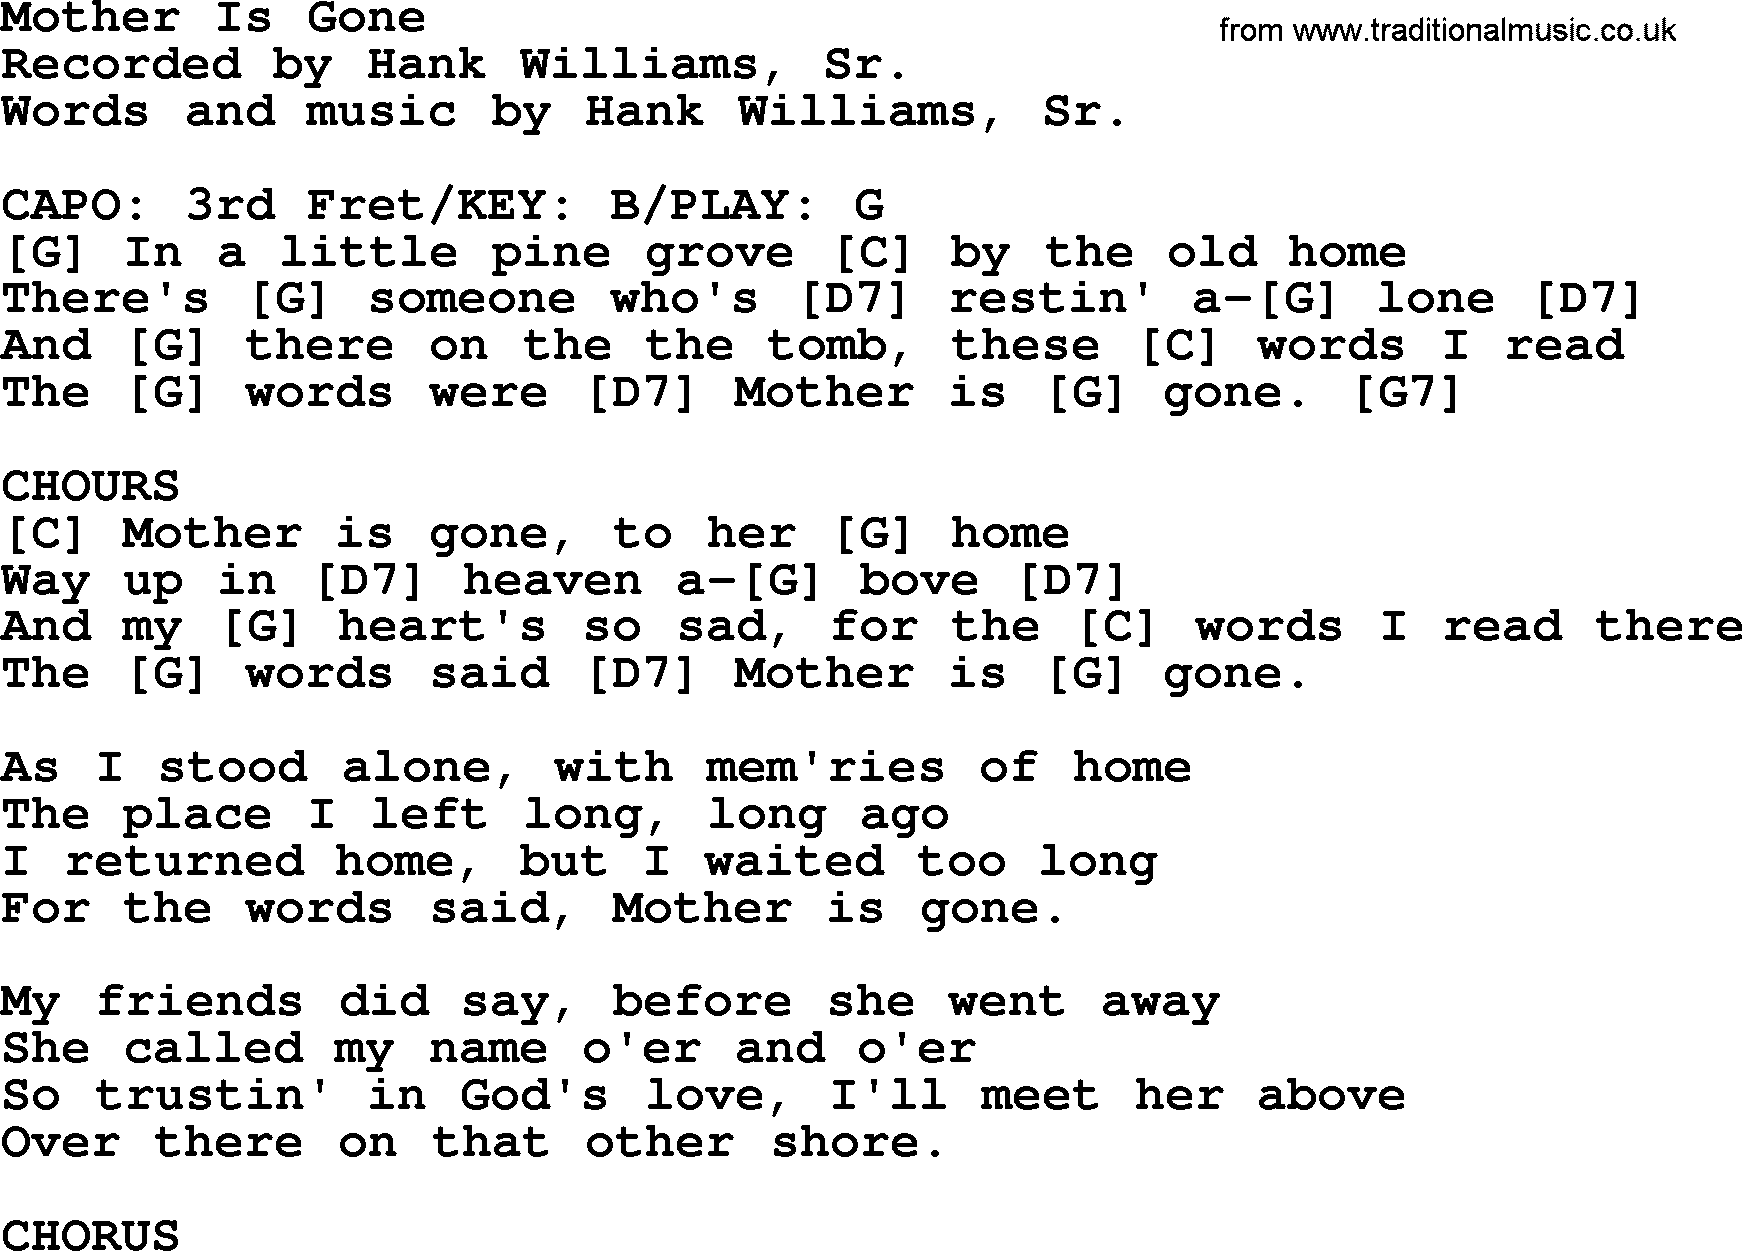 Hank Williams song Mother Is Gone, lyrics and chords